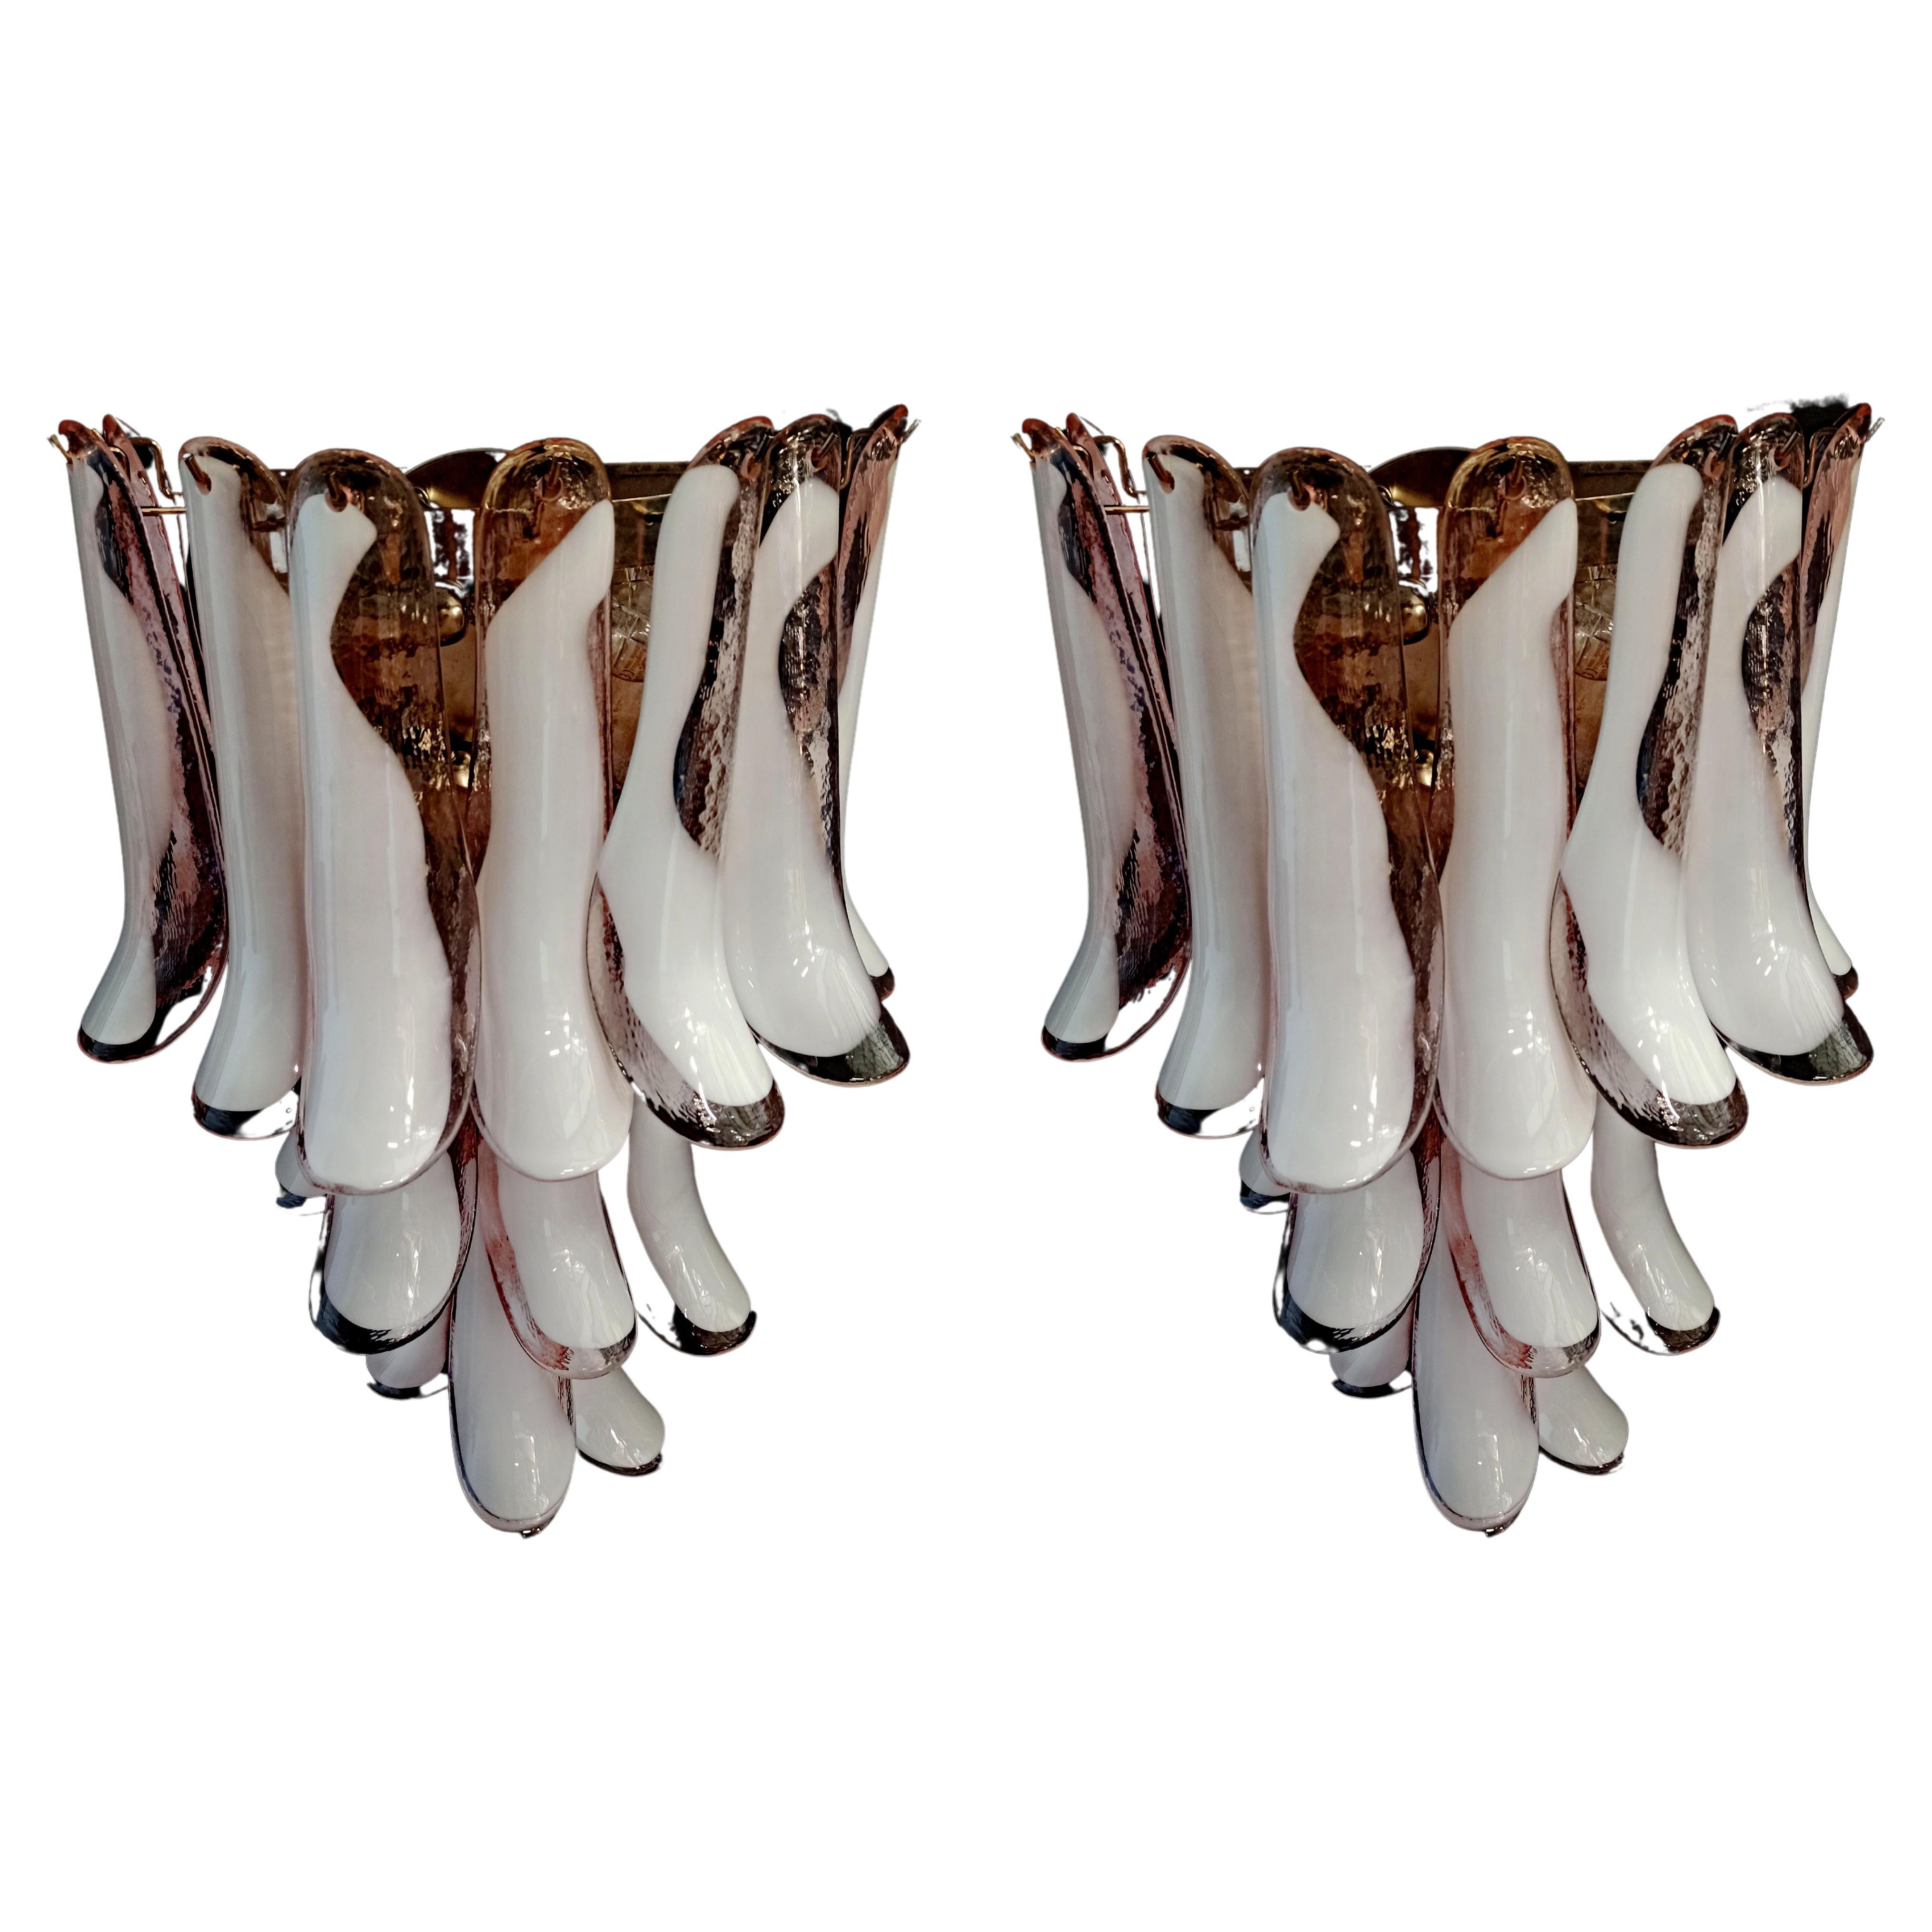 Pair of italian Murano wall sconces. Wall lights have 16 pink and white“lattimo” glasses (for each applique) in a nickel-plated metal frame. Decorative object of great importance.
Period: late XX century
Dimensions: 27,90 inches (72 cm) height;